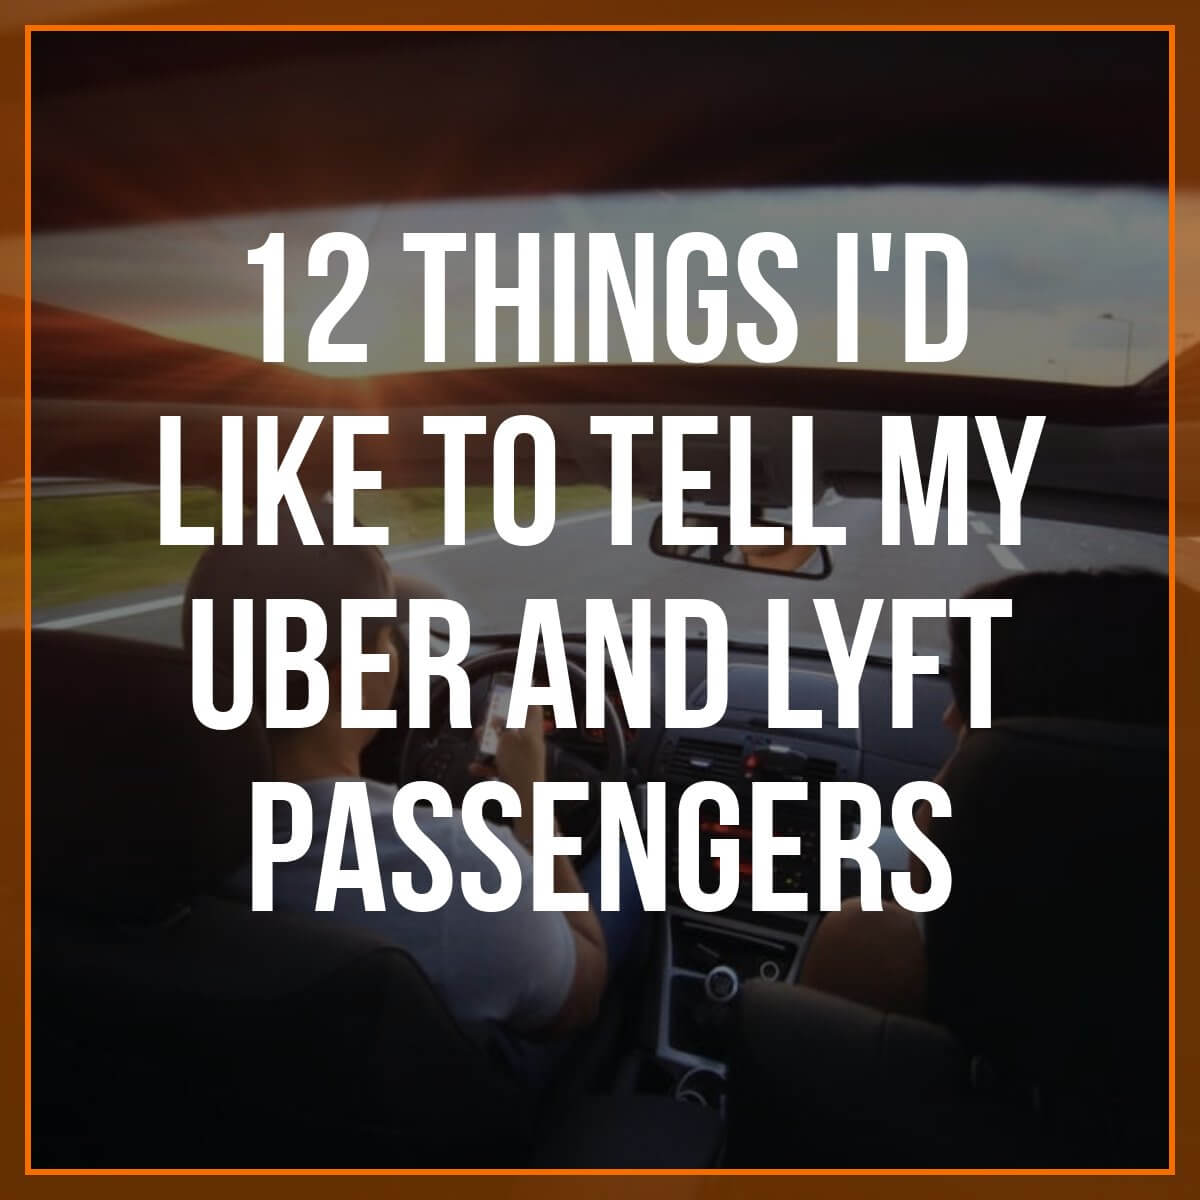 12 Things I’d Like to Tell My Uber and Lyft Passengers